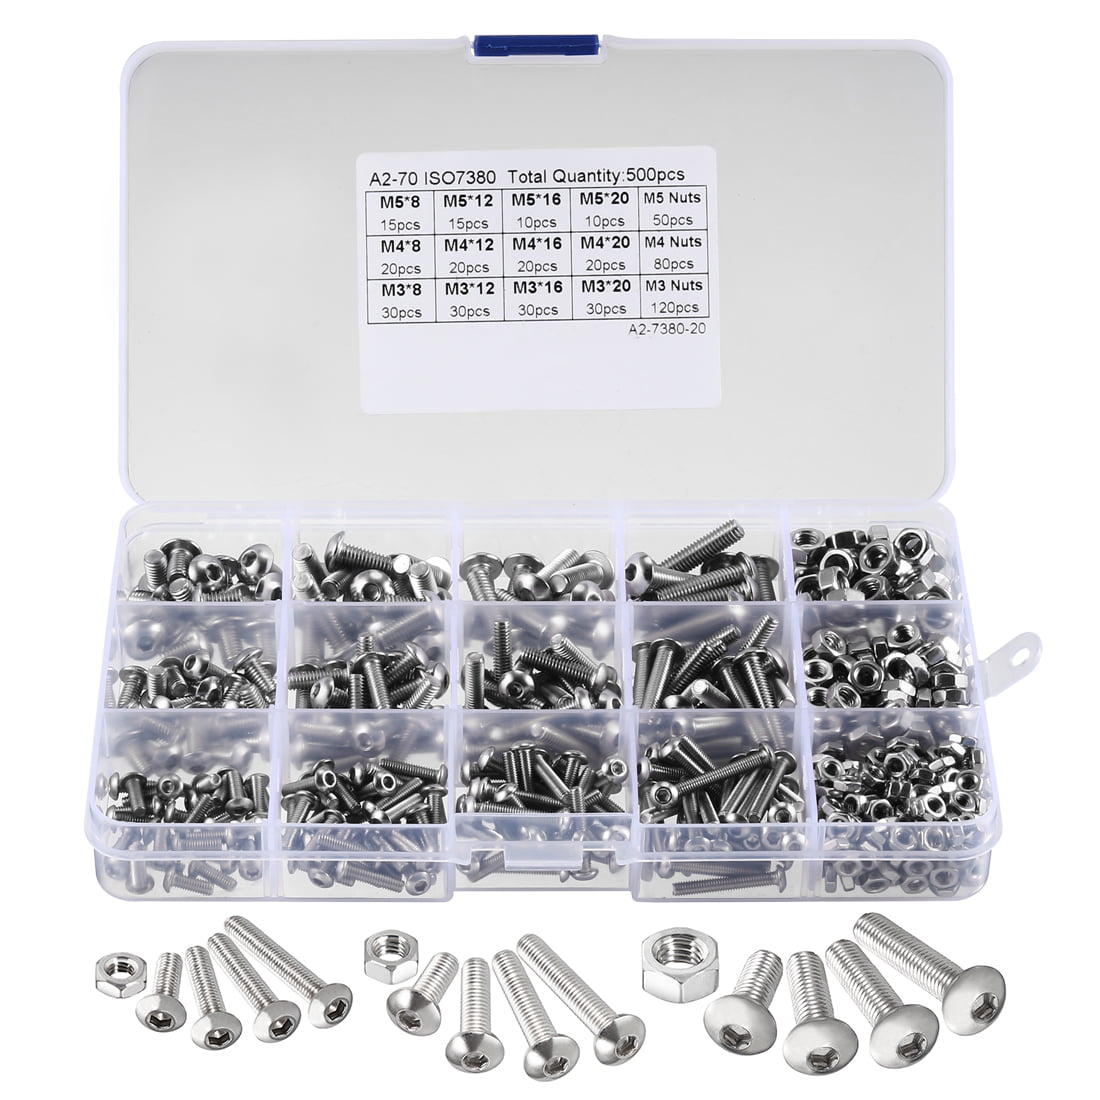 500 x M3 M4 M5 A2 STAINLESS STEEL 304 HEX SOCKET BUTTON HEAD BOLTS SCREWS NUTS 